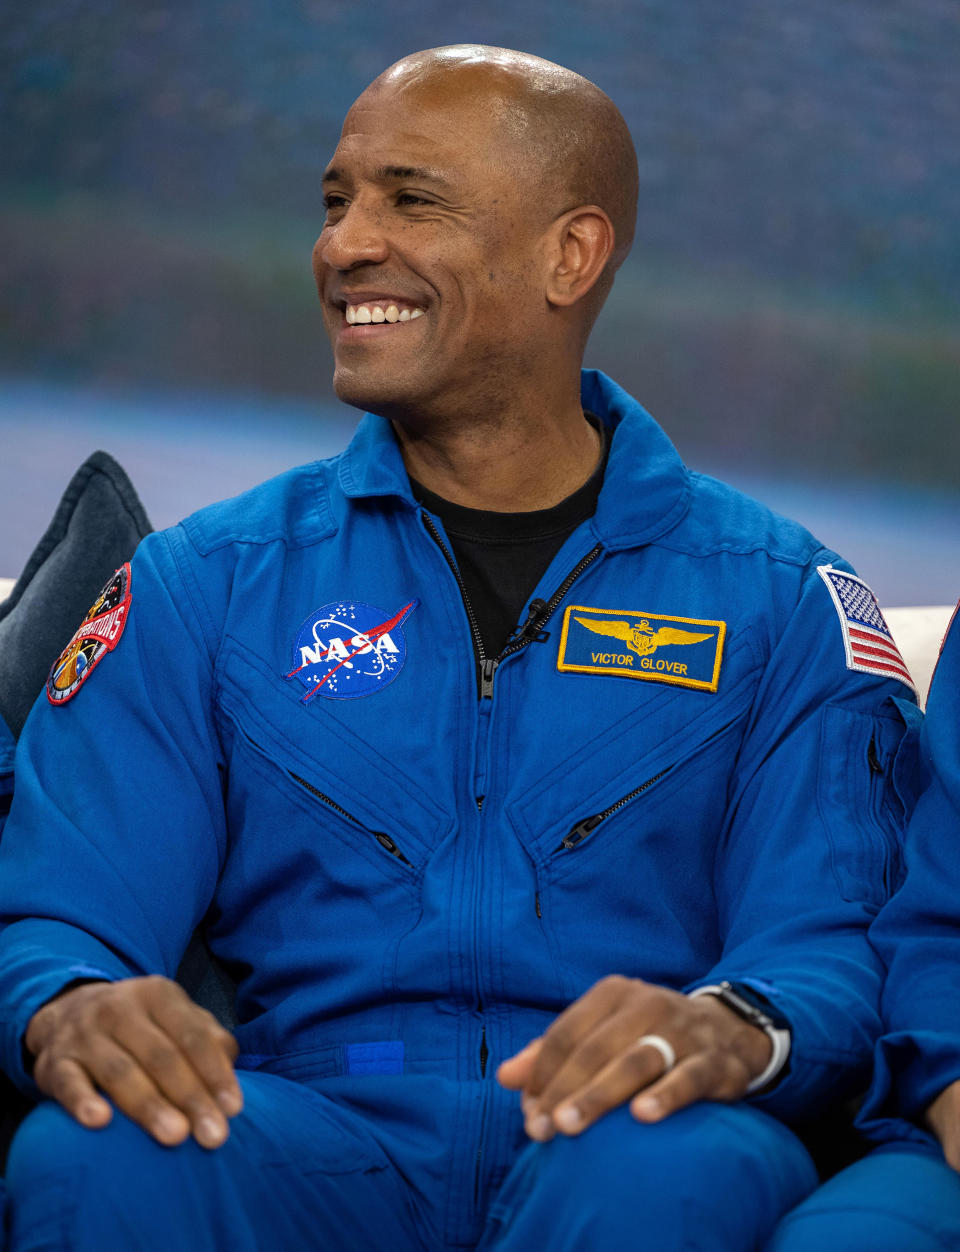 Pilot Victor Glover. (Nathan Congleton / TODAY)